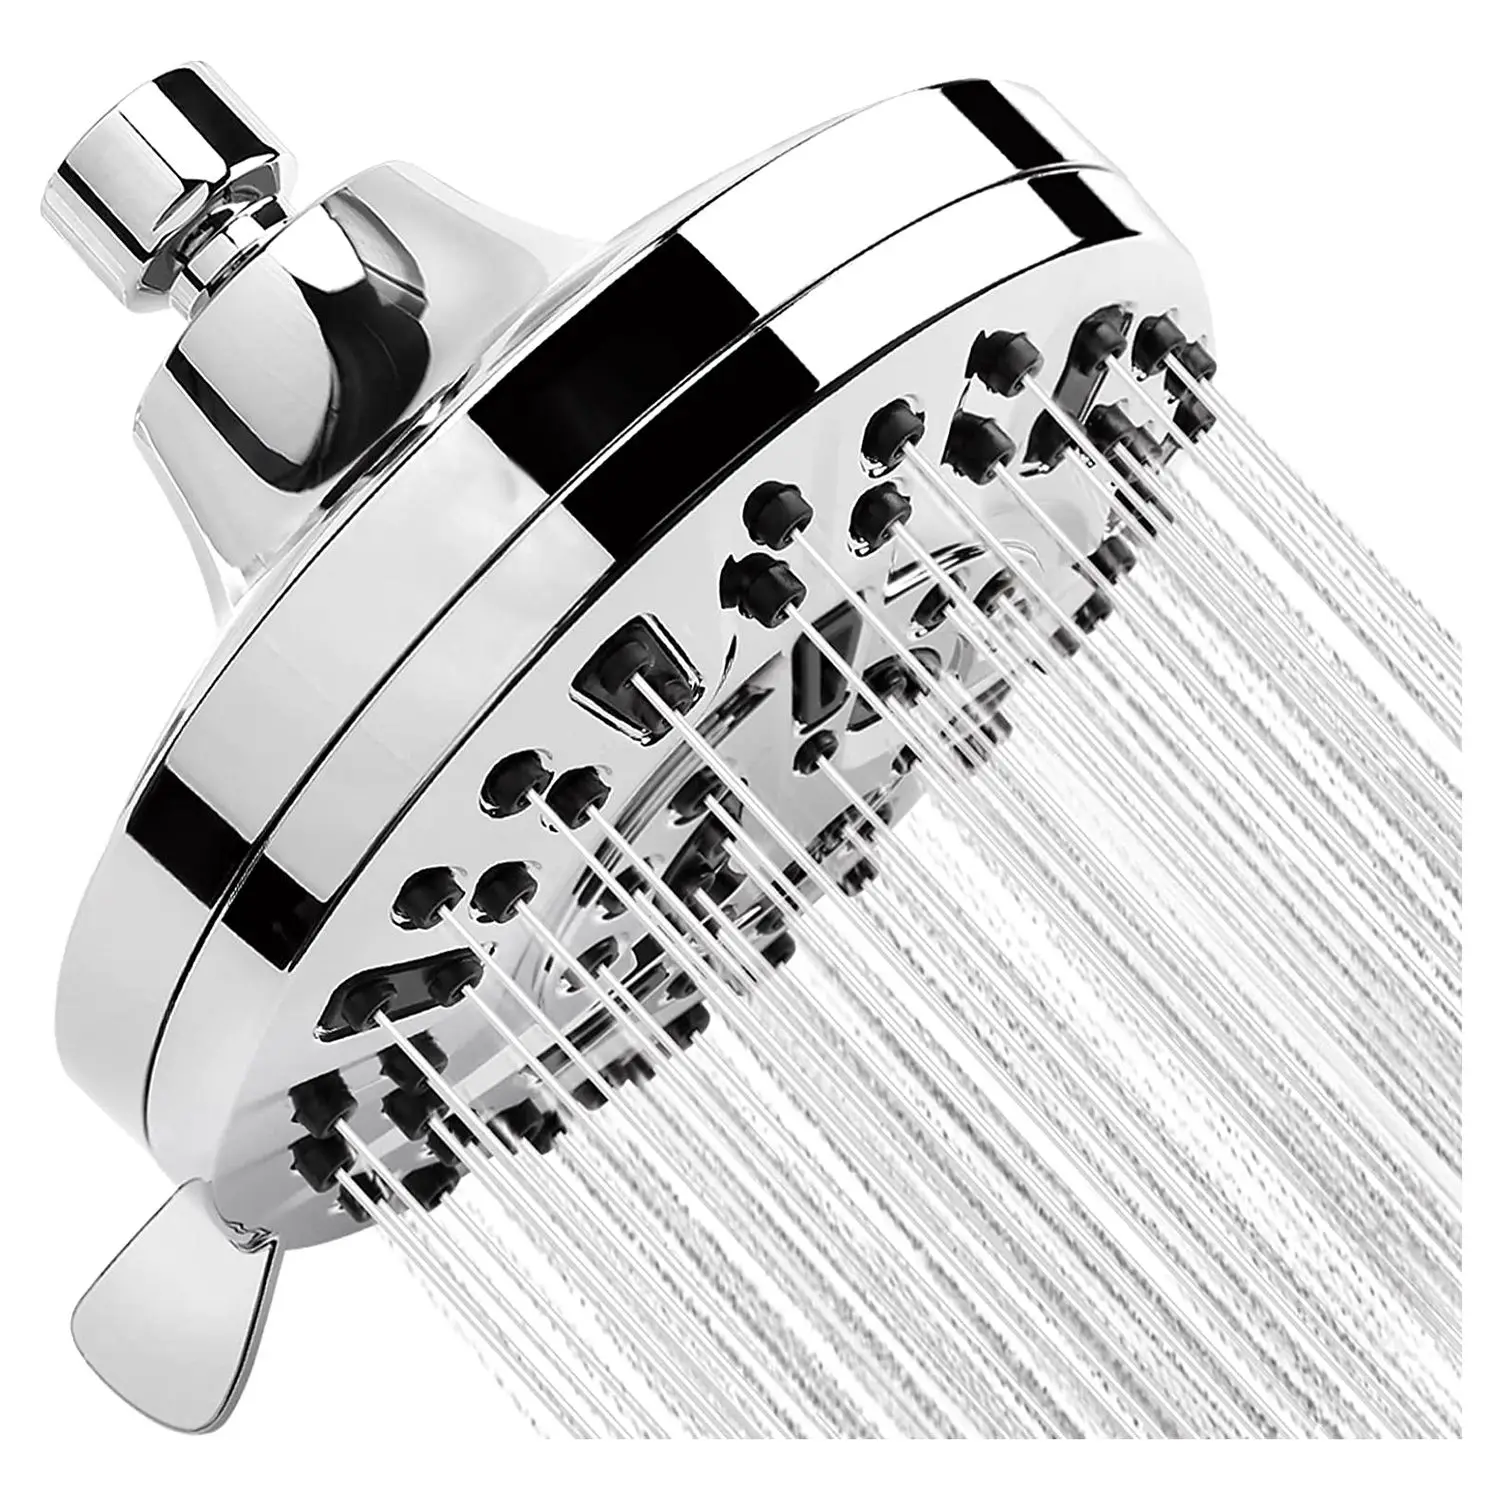 

Shower Head, Rainfall ShowerHead,5.1Inches High-Pressure with 63 8Spray Modes-Replacement for Bathroom Shower Heads